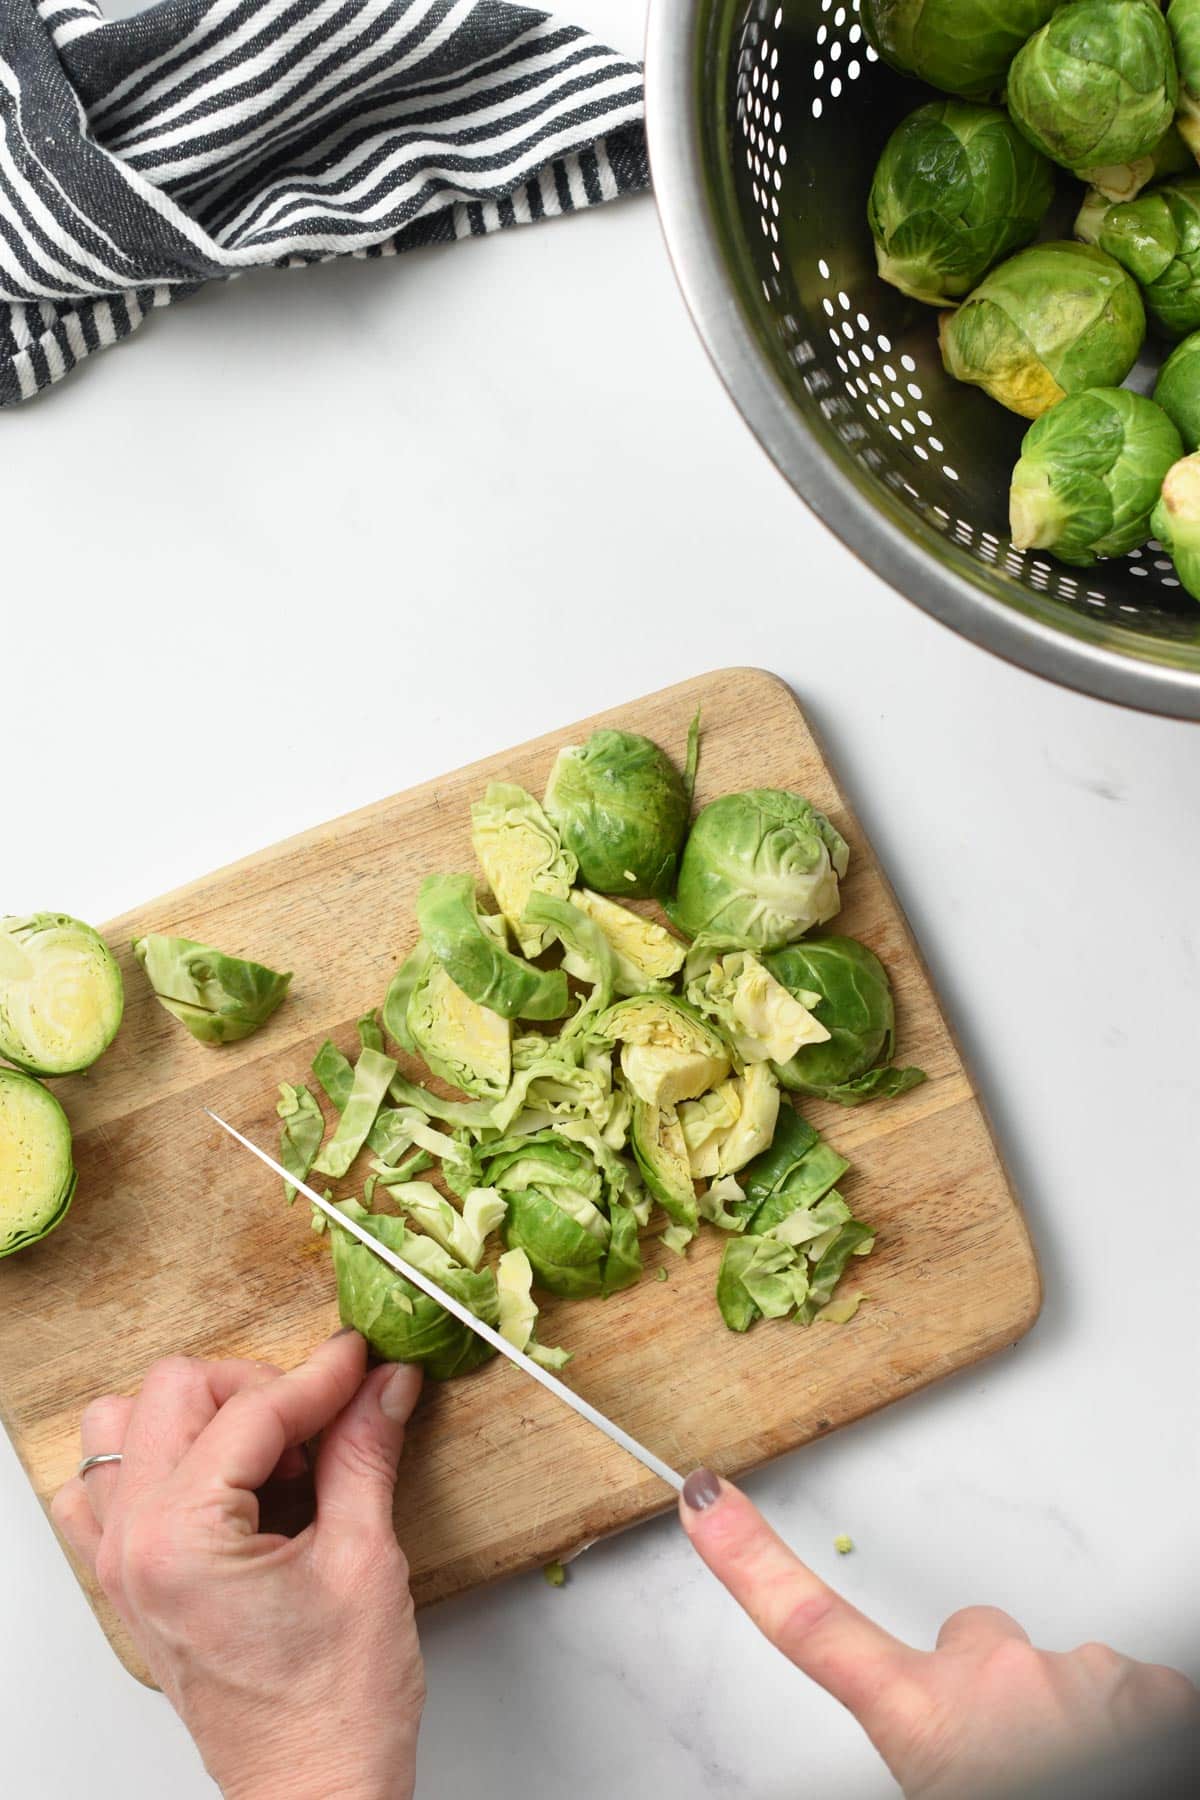 How to Shred Brussel Sprouts